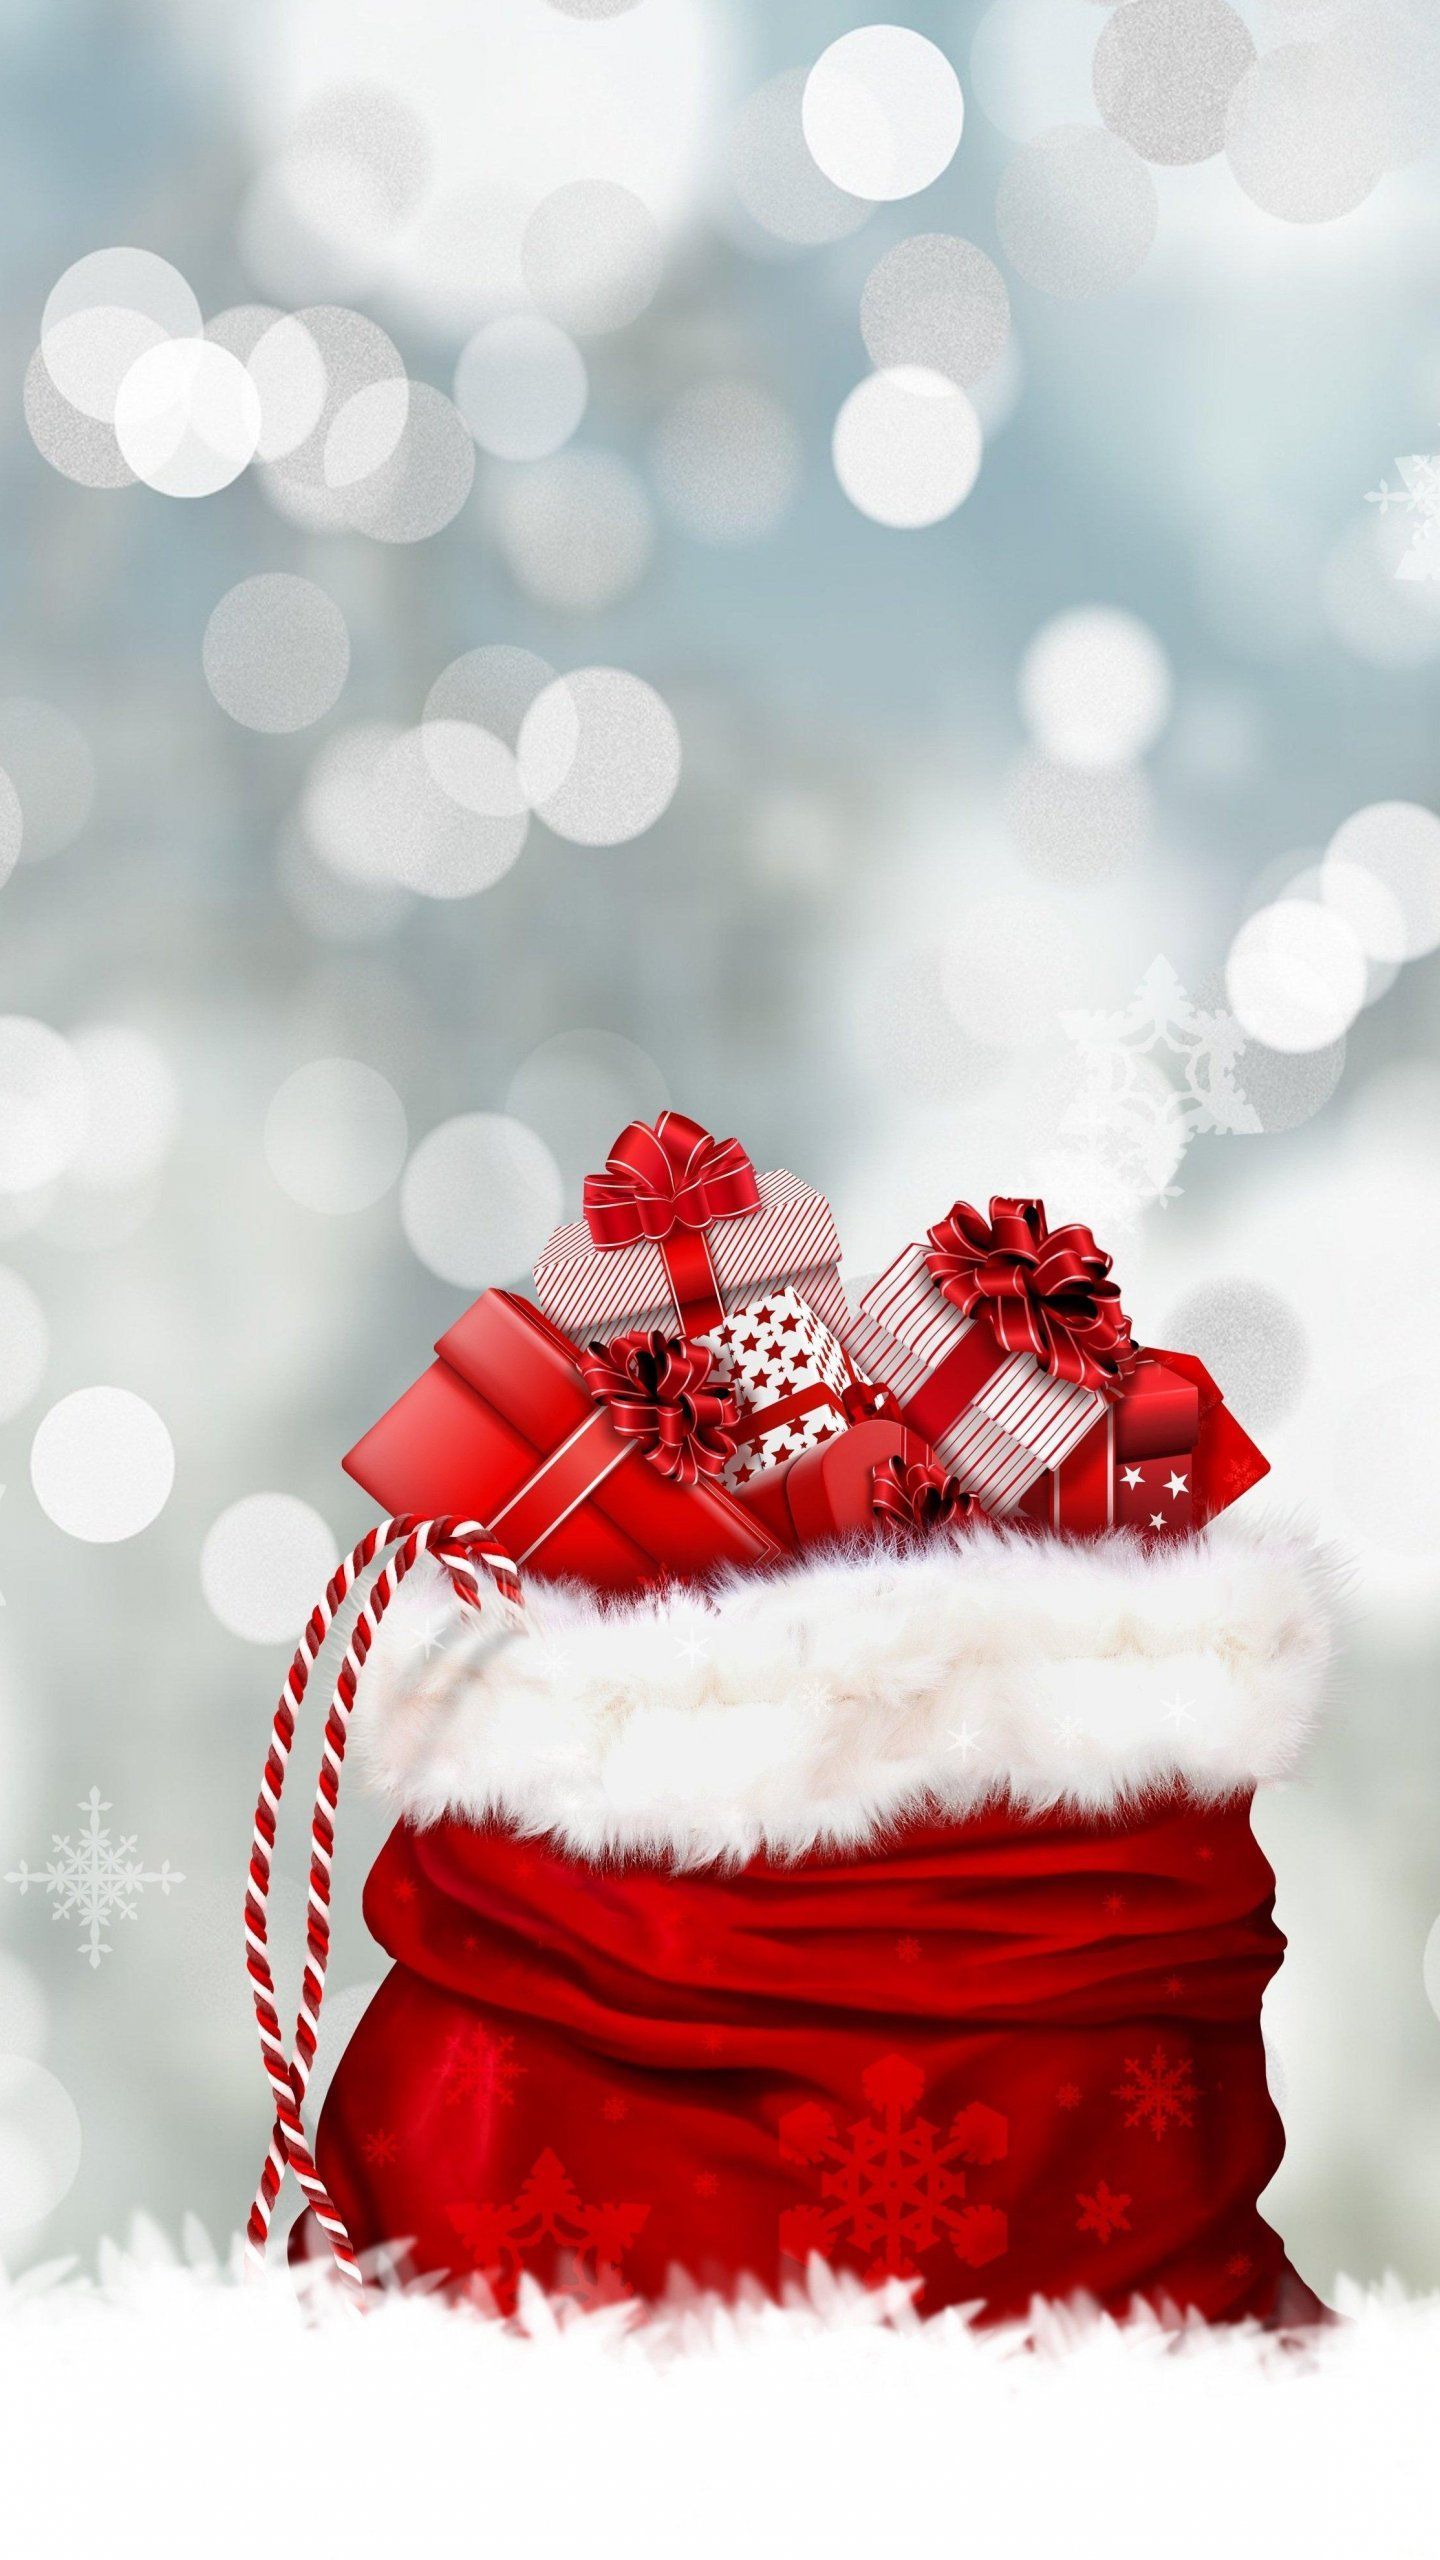 A red bag of gifts on a white and silver background - White Christmas